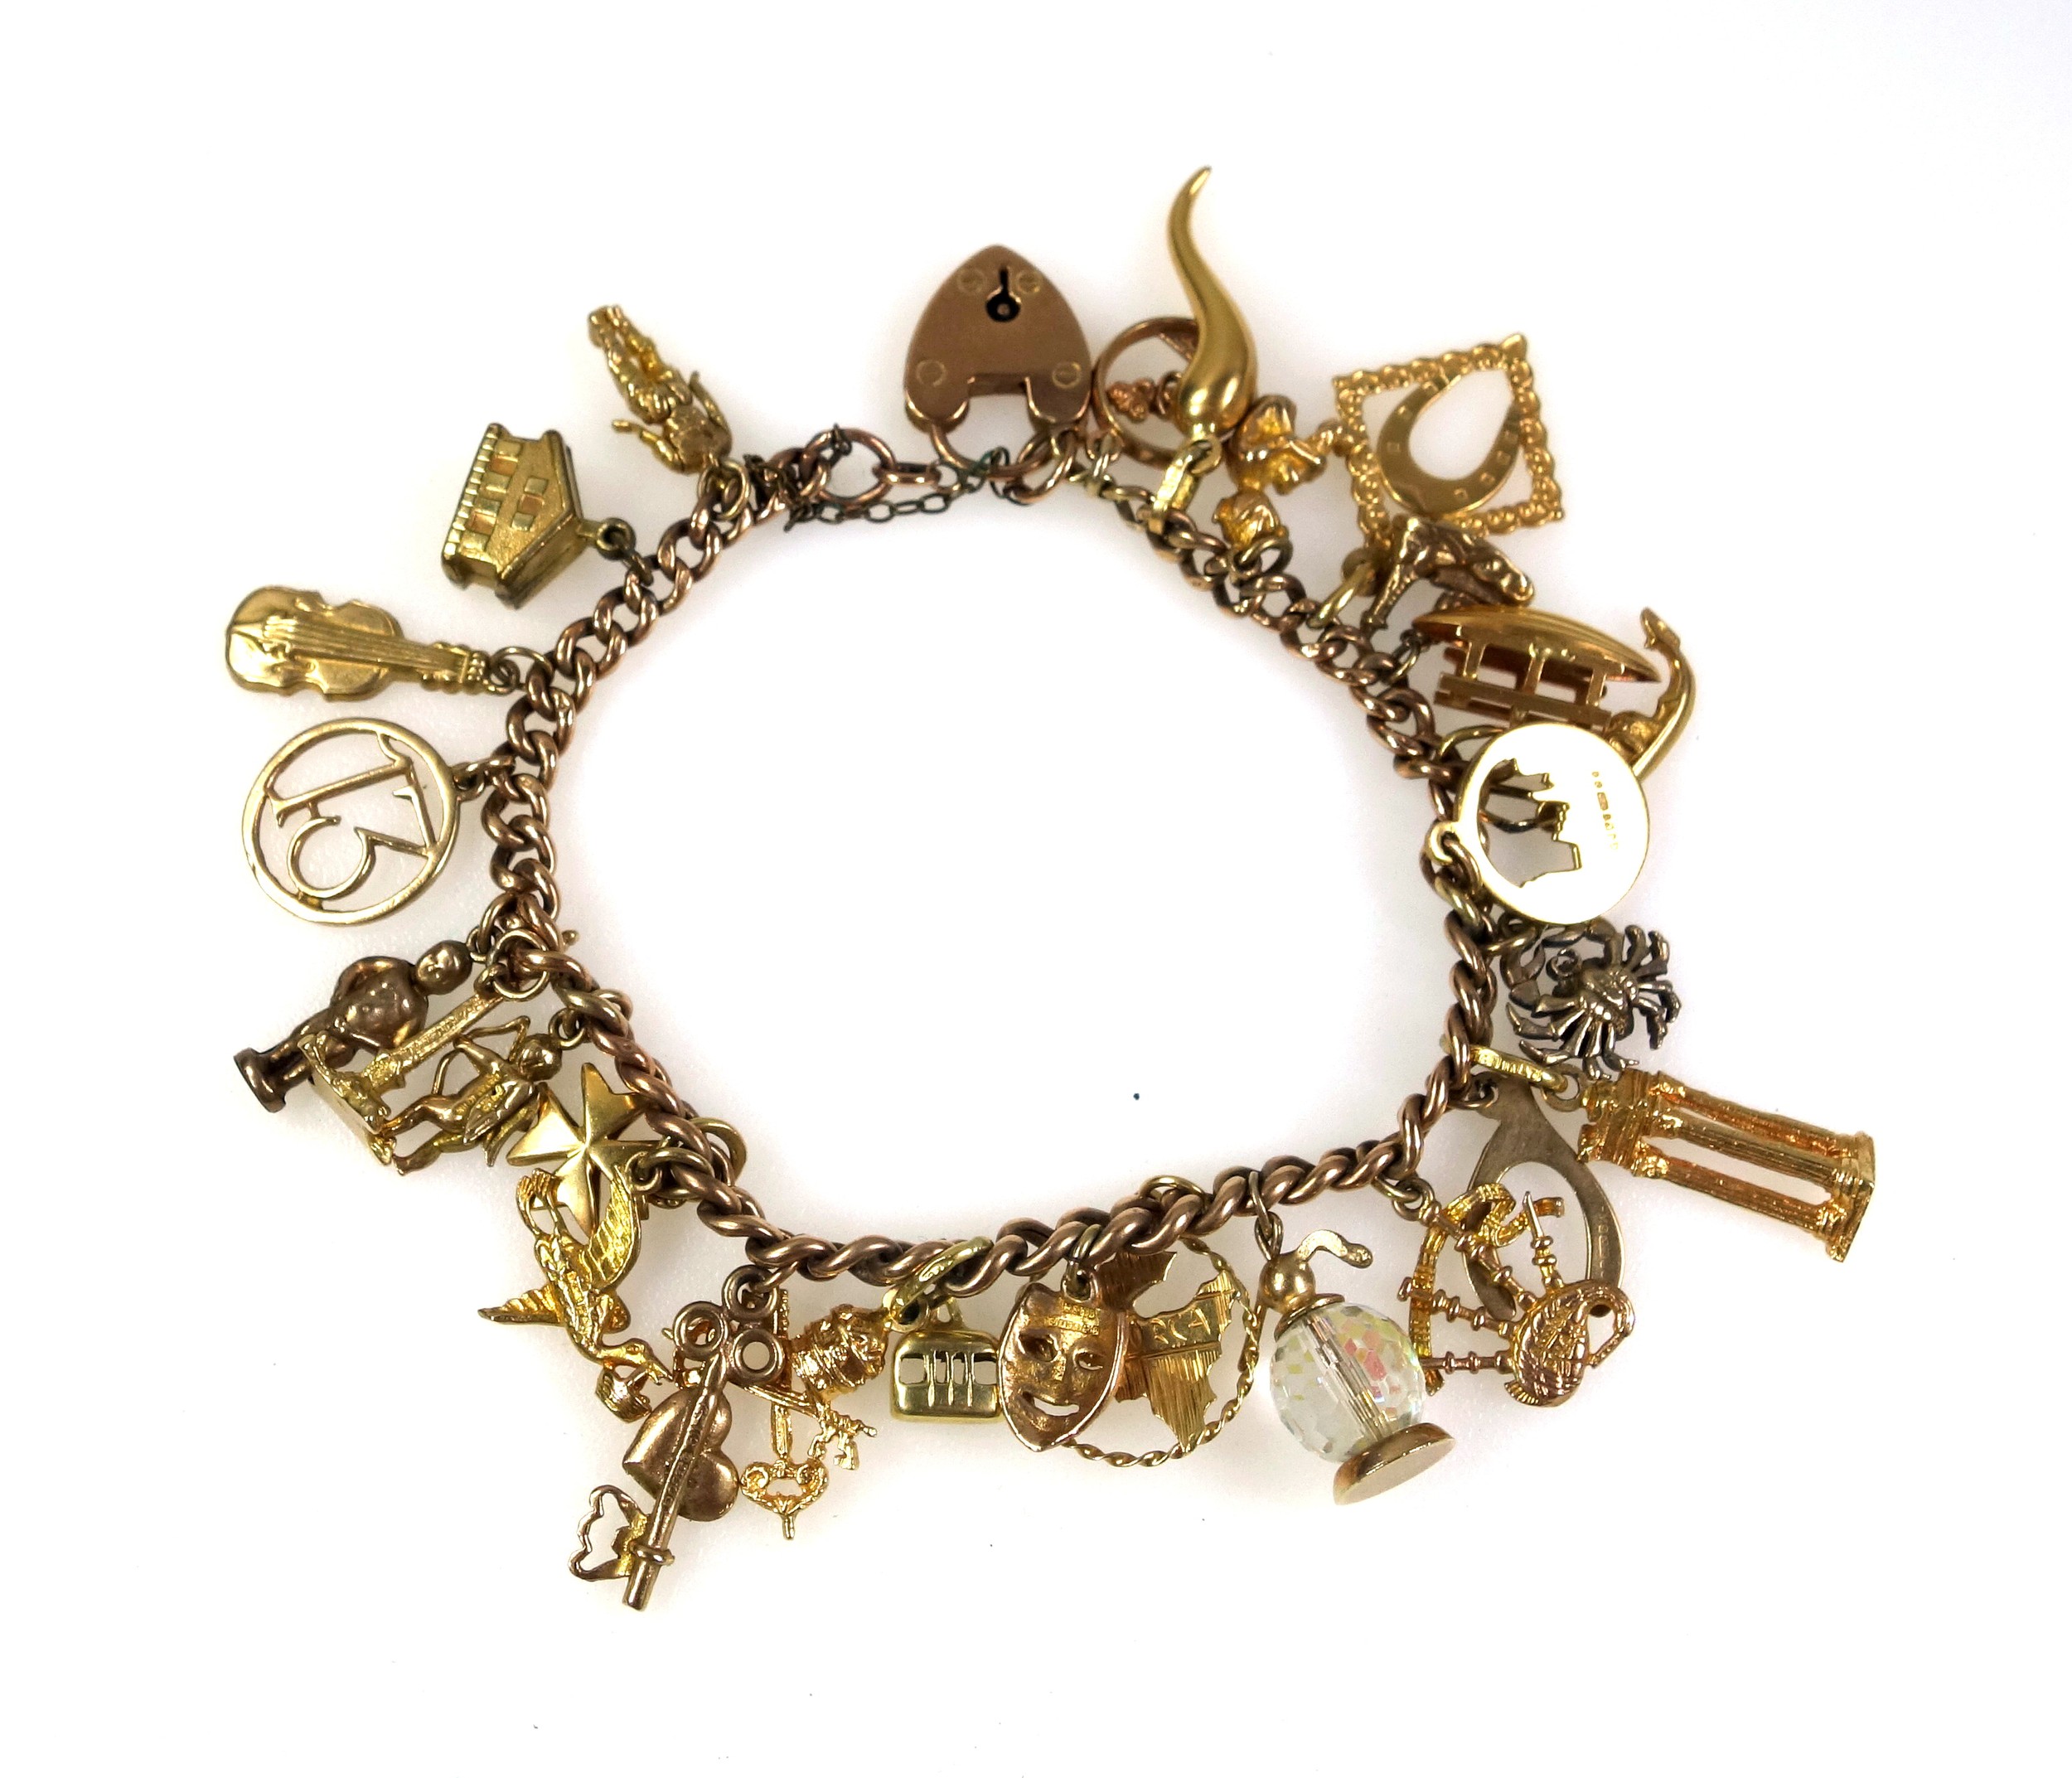 9ct gold charm bracelet with 27 charms, gross weight 44.2 grams - Image 2 of 5